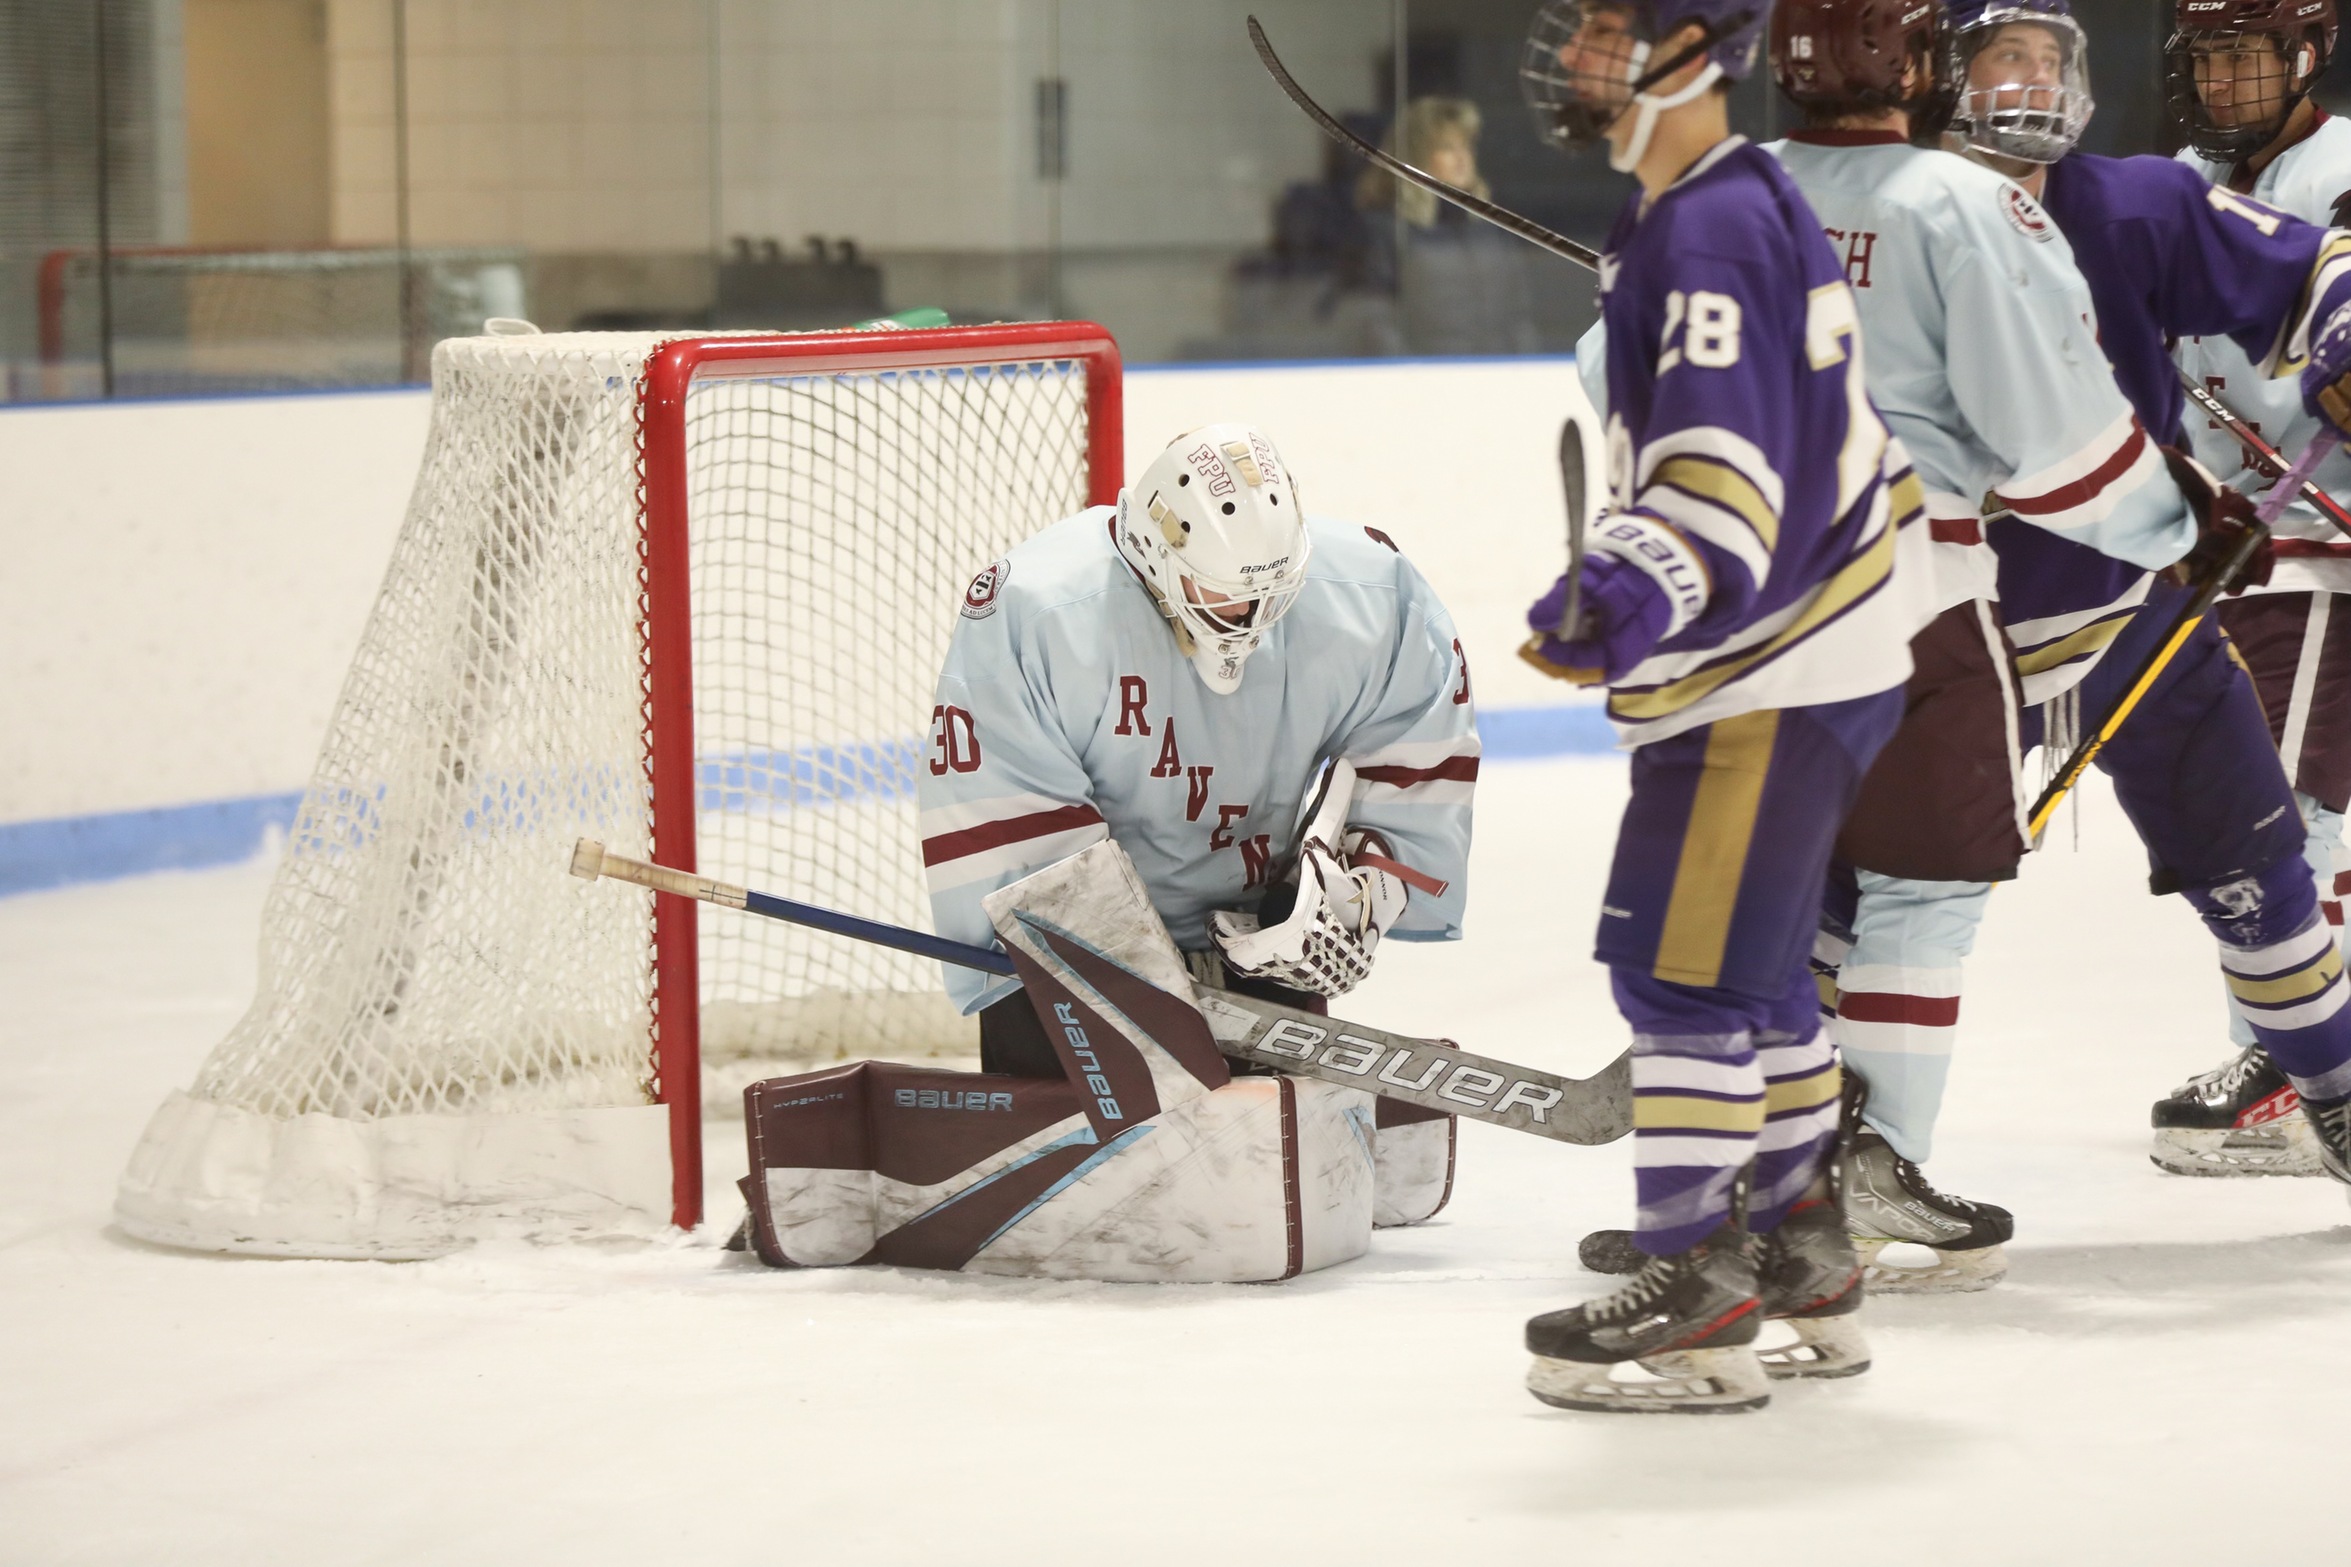 Men's Ice Hockey: Ravens Complete Come Back to Sweep Saint Michael's, 4-2.